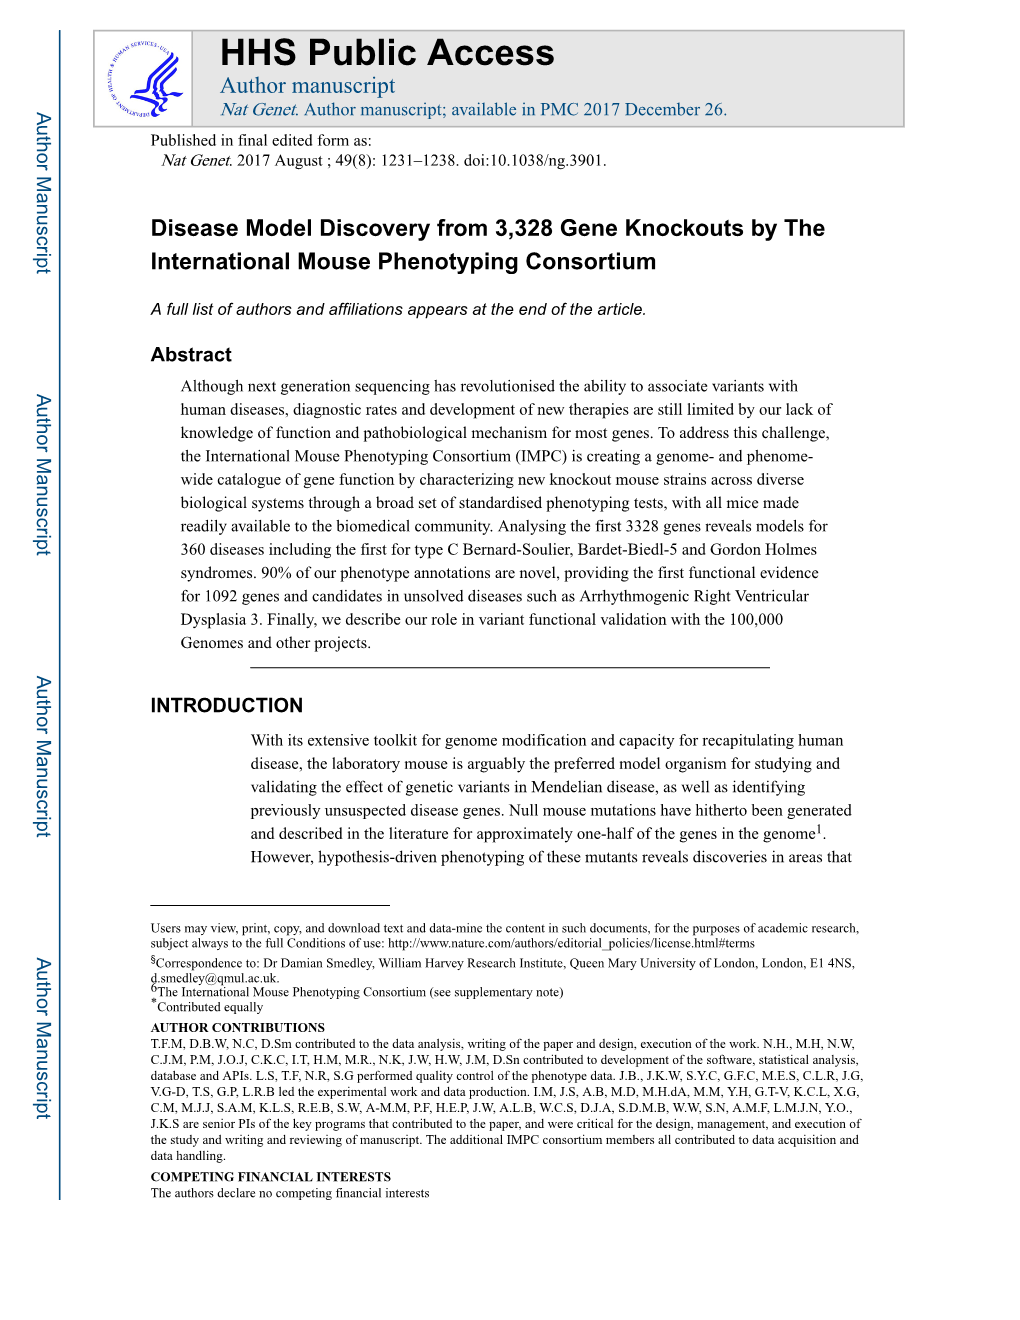 Disease Model Discovery from 3,328 Gene Knockouts by the International Mouse Phenotyping Consortium